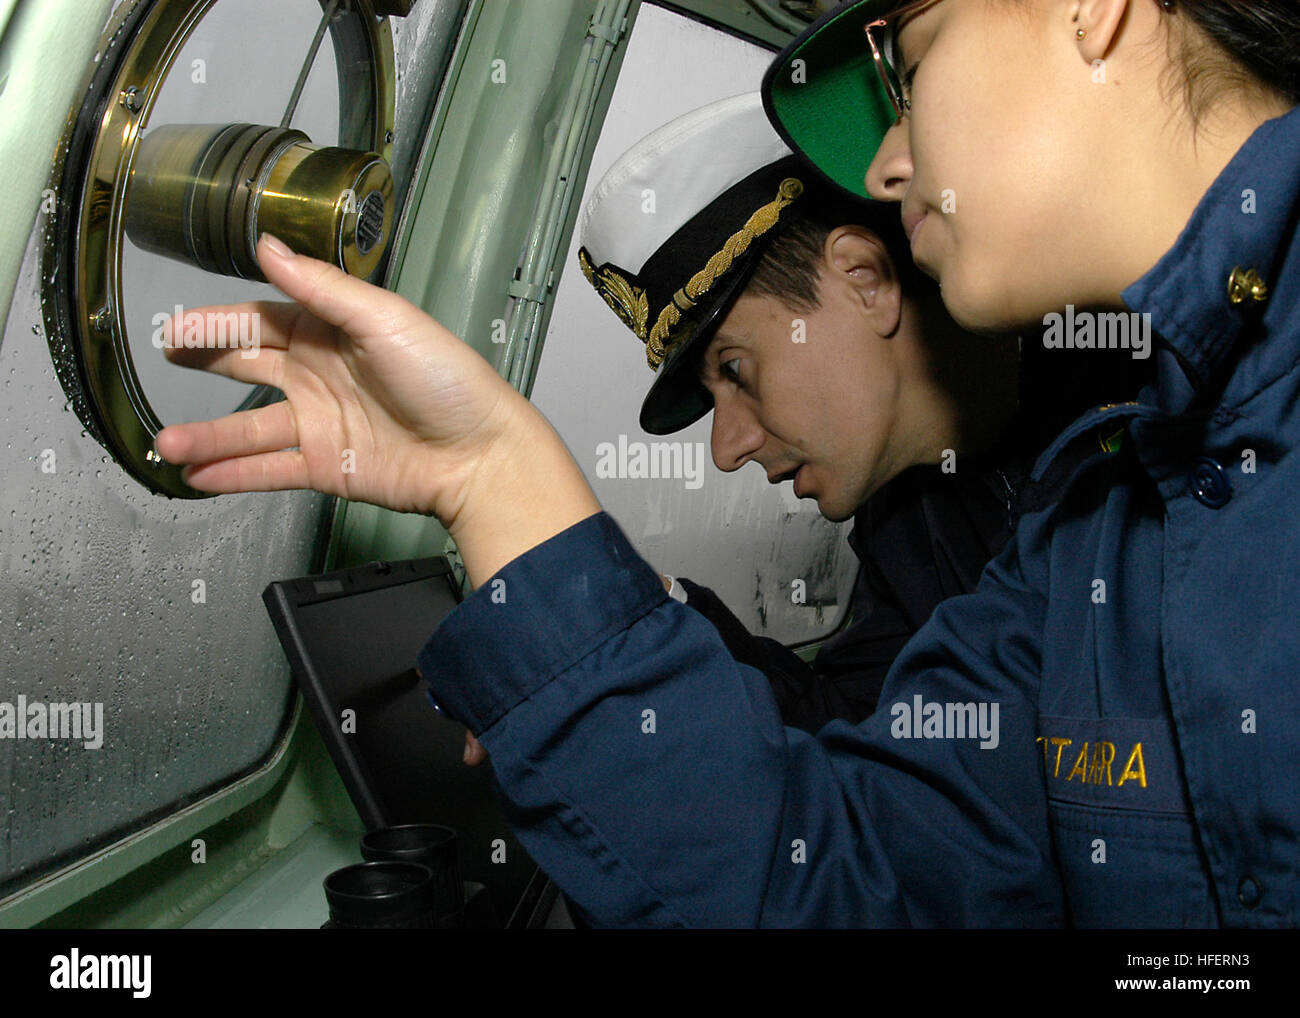 031205-N-0399H-033 Aboard Yard Patrol Craft 698 (YP 698) Dec. 5, 2003 -- Midshipman 2nd Class Mirel Gutarra, from Lima, Peru, makes visual contact with aids of navigation and reports her findings to Lt. Cmdr. Paolo Lombardi, an exchange instructor at the U.S. Naval Academy from Laspezia, Italy, from the bridge of Yard Patrol Craft 698 (YP 698) as it makes its way to Coast Guard Station Philadelphia. The boat and crew are part of a formation of three Yard Patrol Crafts, which made the transit the 104th playing of the Army Navy game. The Navy went on to defeat the Black Knights of Army by a scor Stock Photo